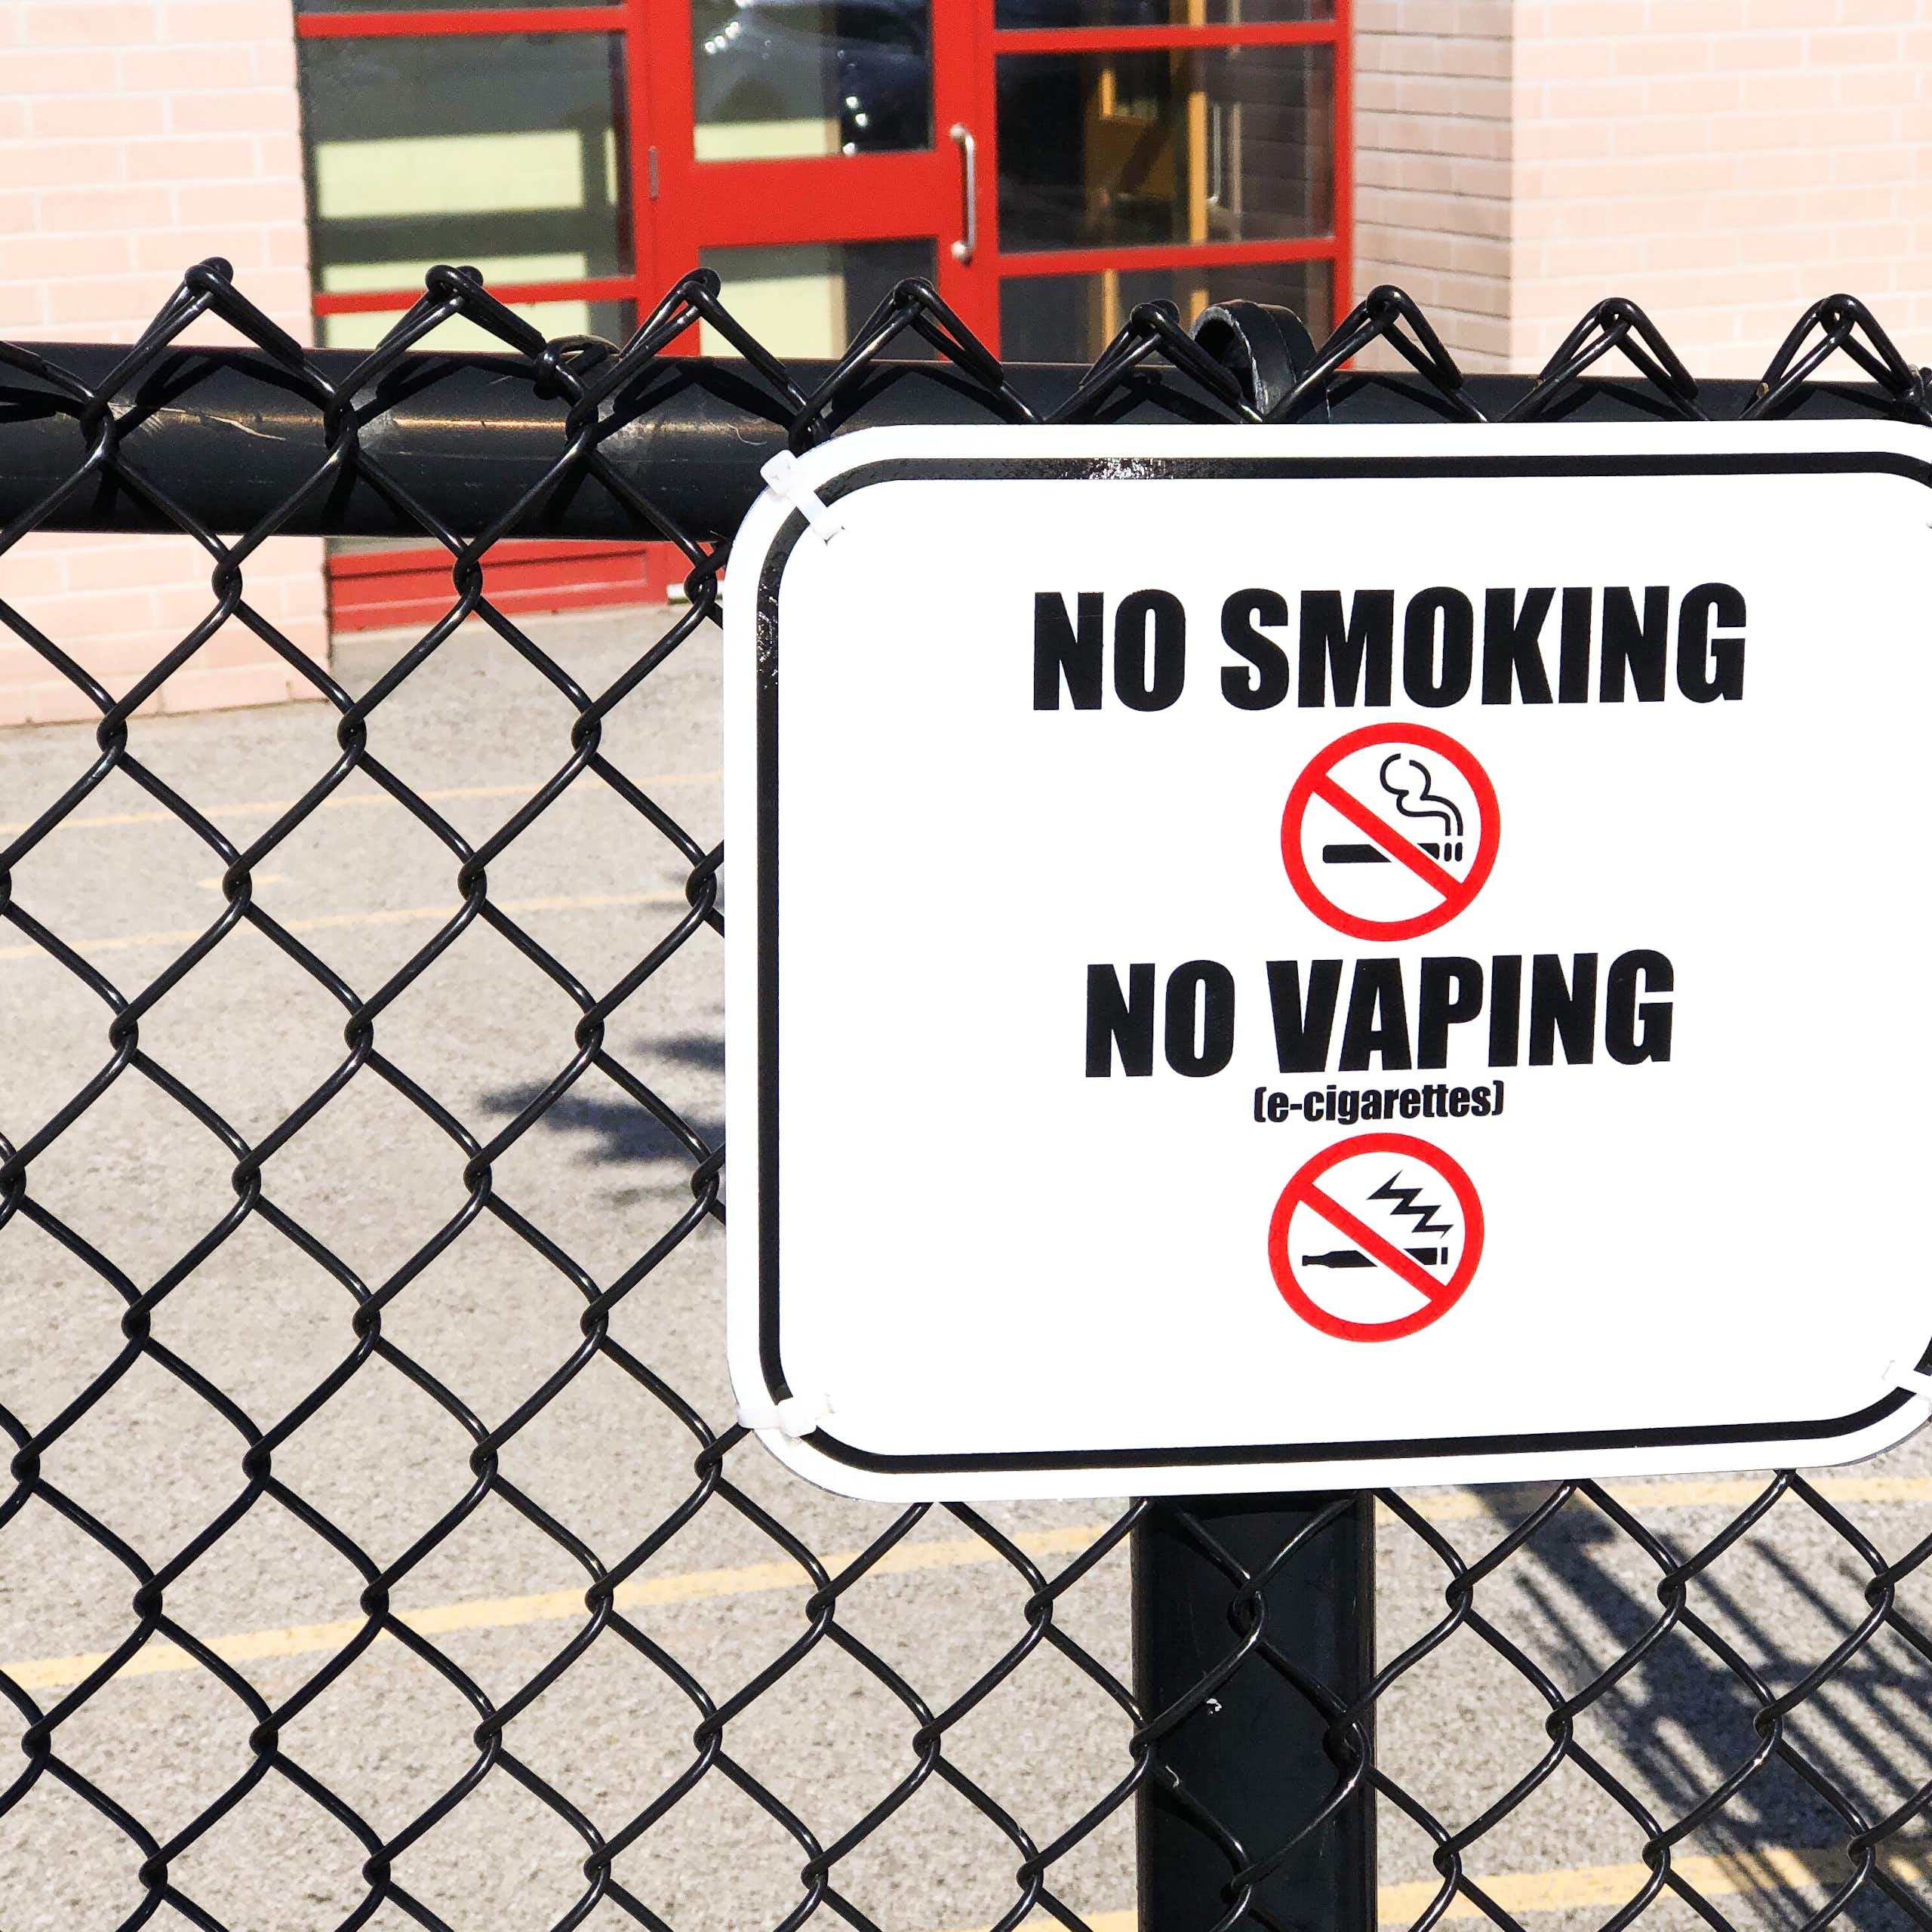 A no smoking, no vaping sign seen on a fence.